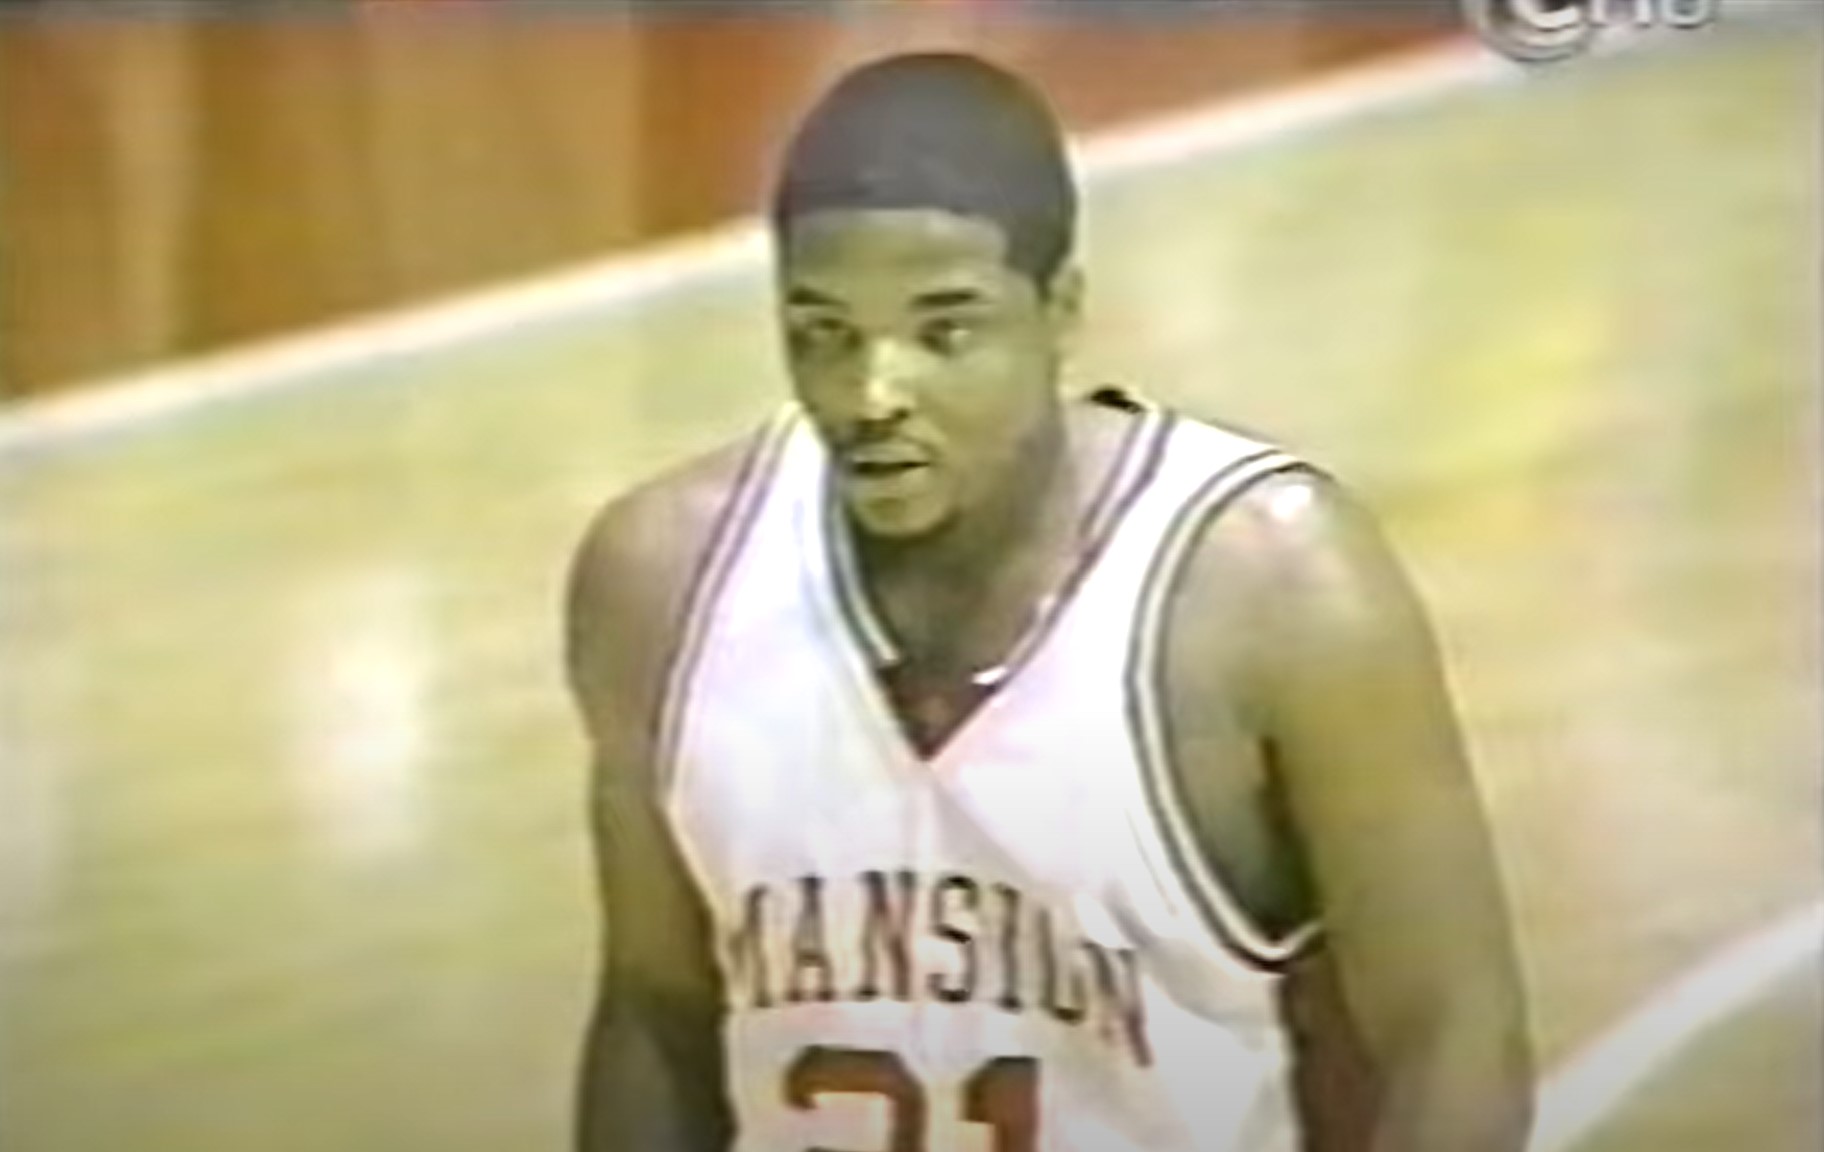 Maurice Rice stands on the basketball court during the game.